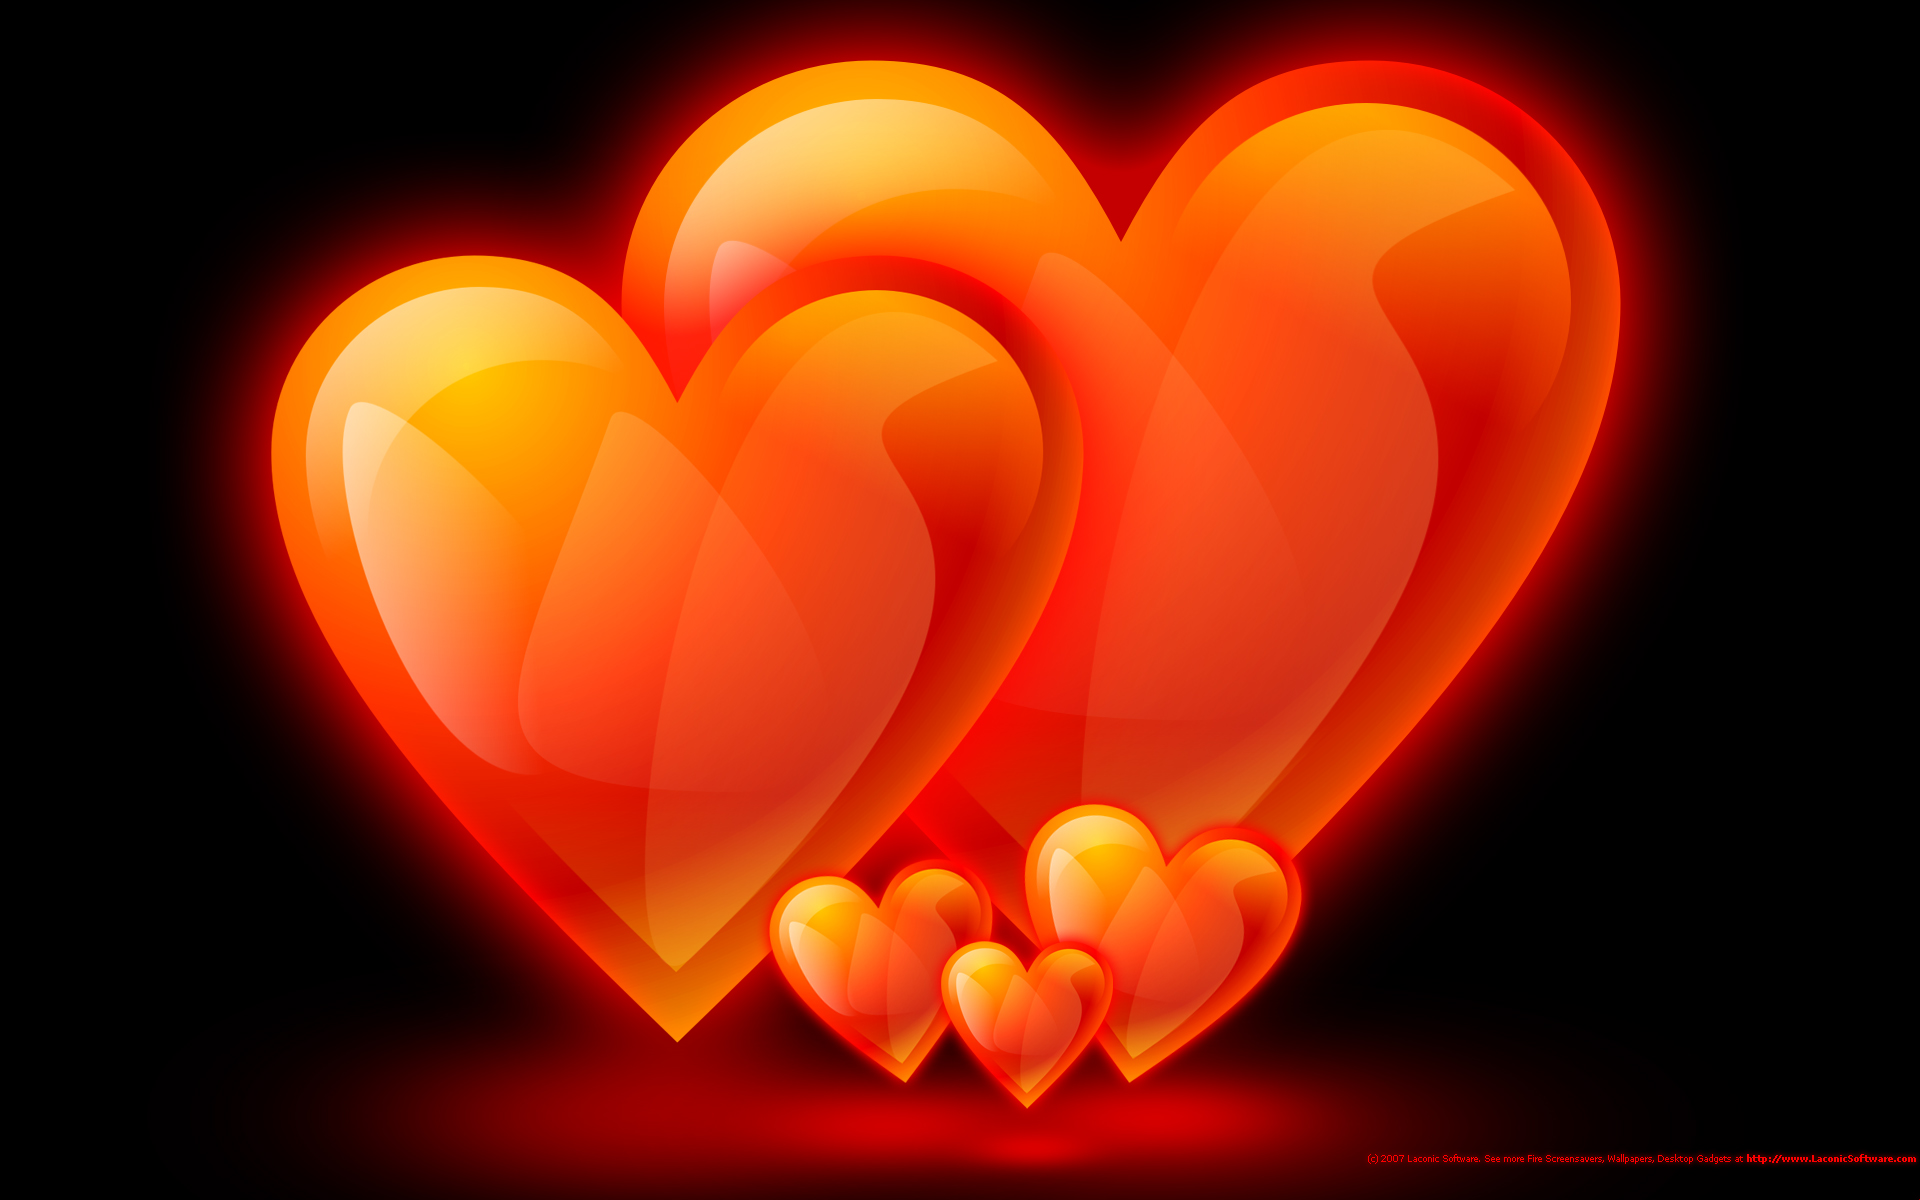 Cool Hearts With Flames Image